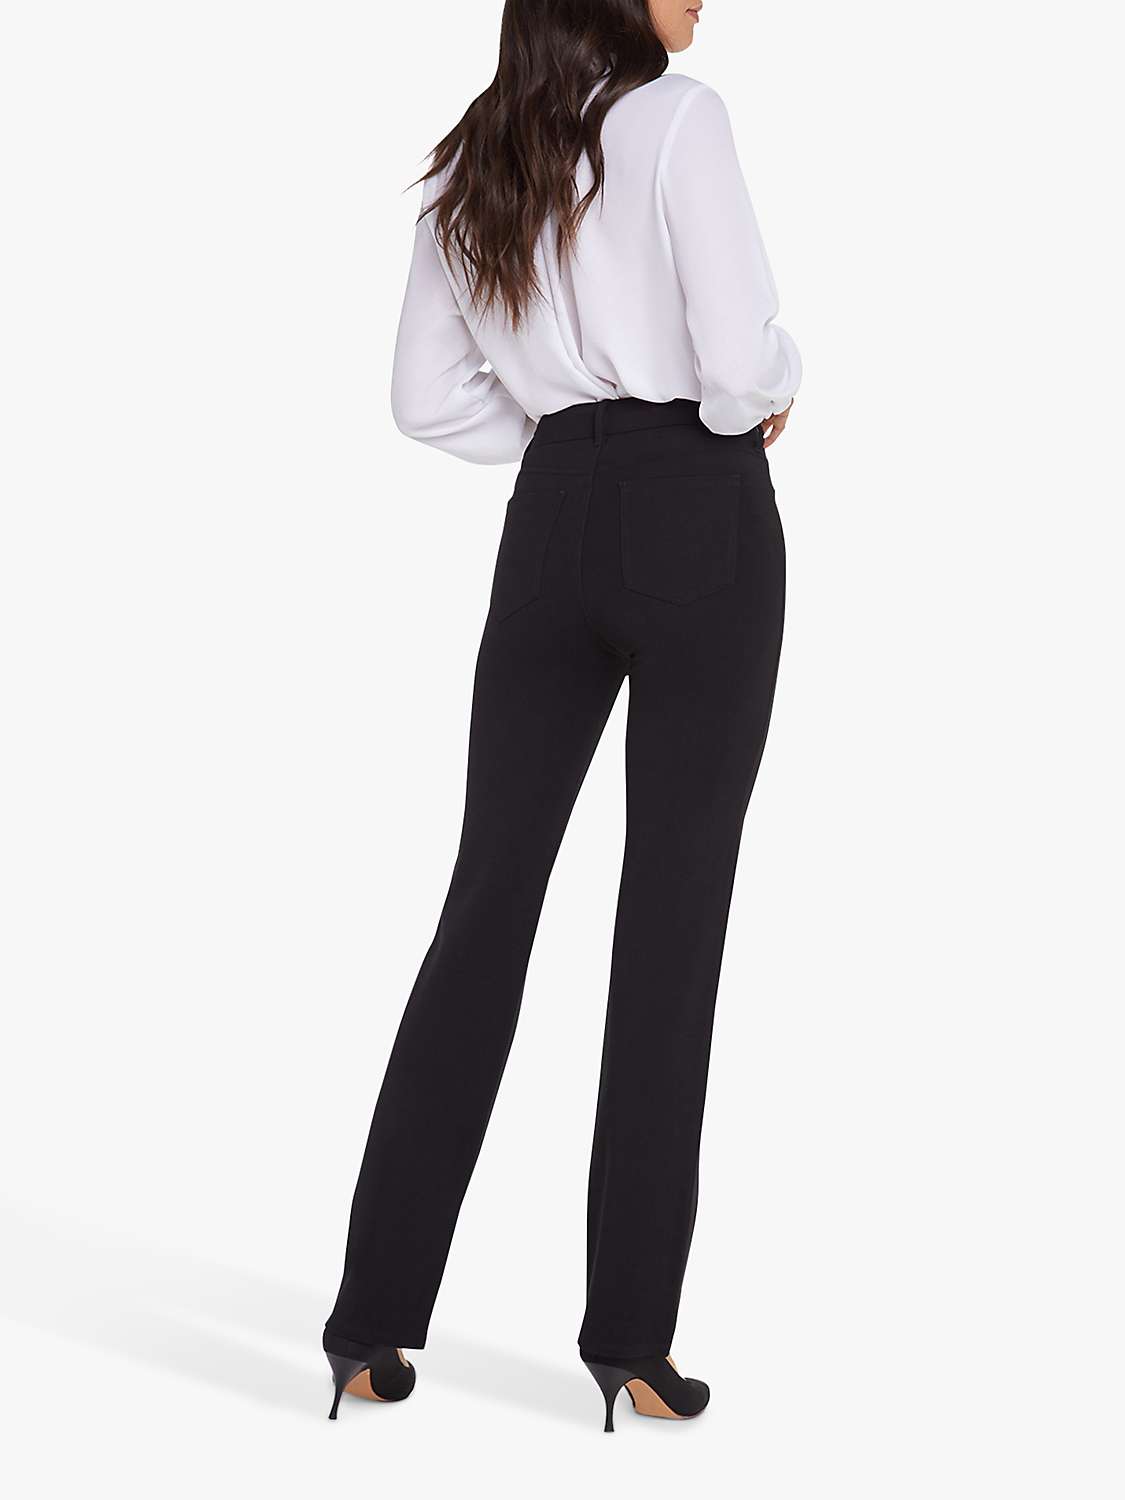 Buy NYDJ Sculpt Her Marilyn Straight Leg Jersey Trousers Online at johnlewis.com